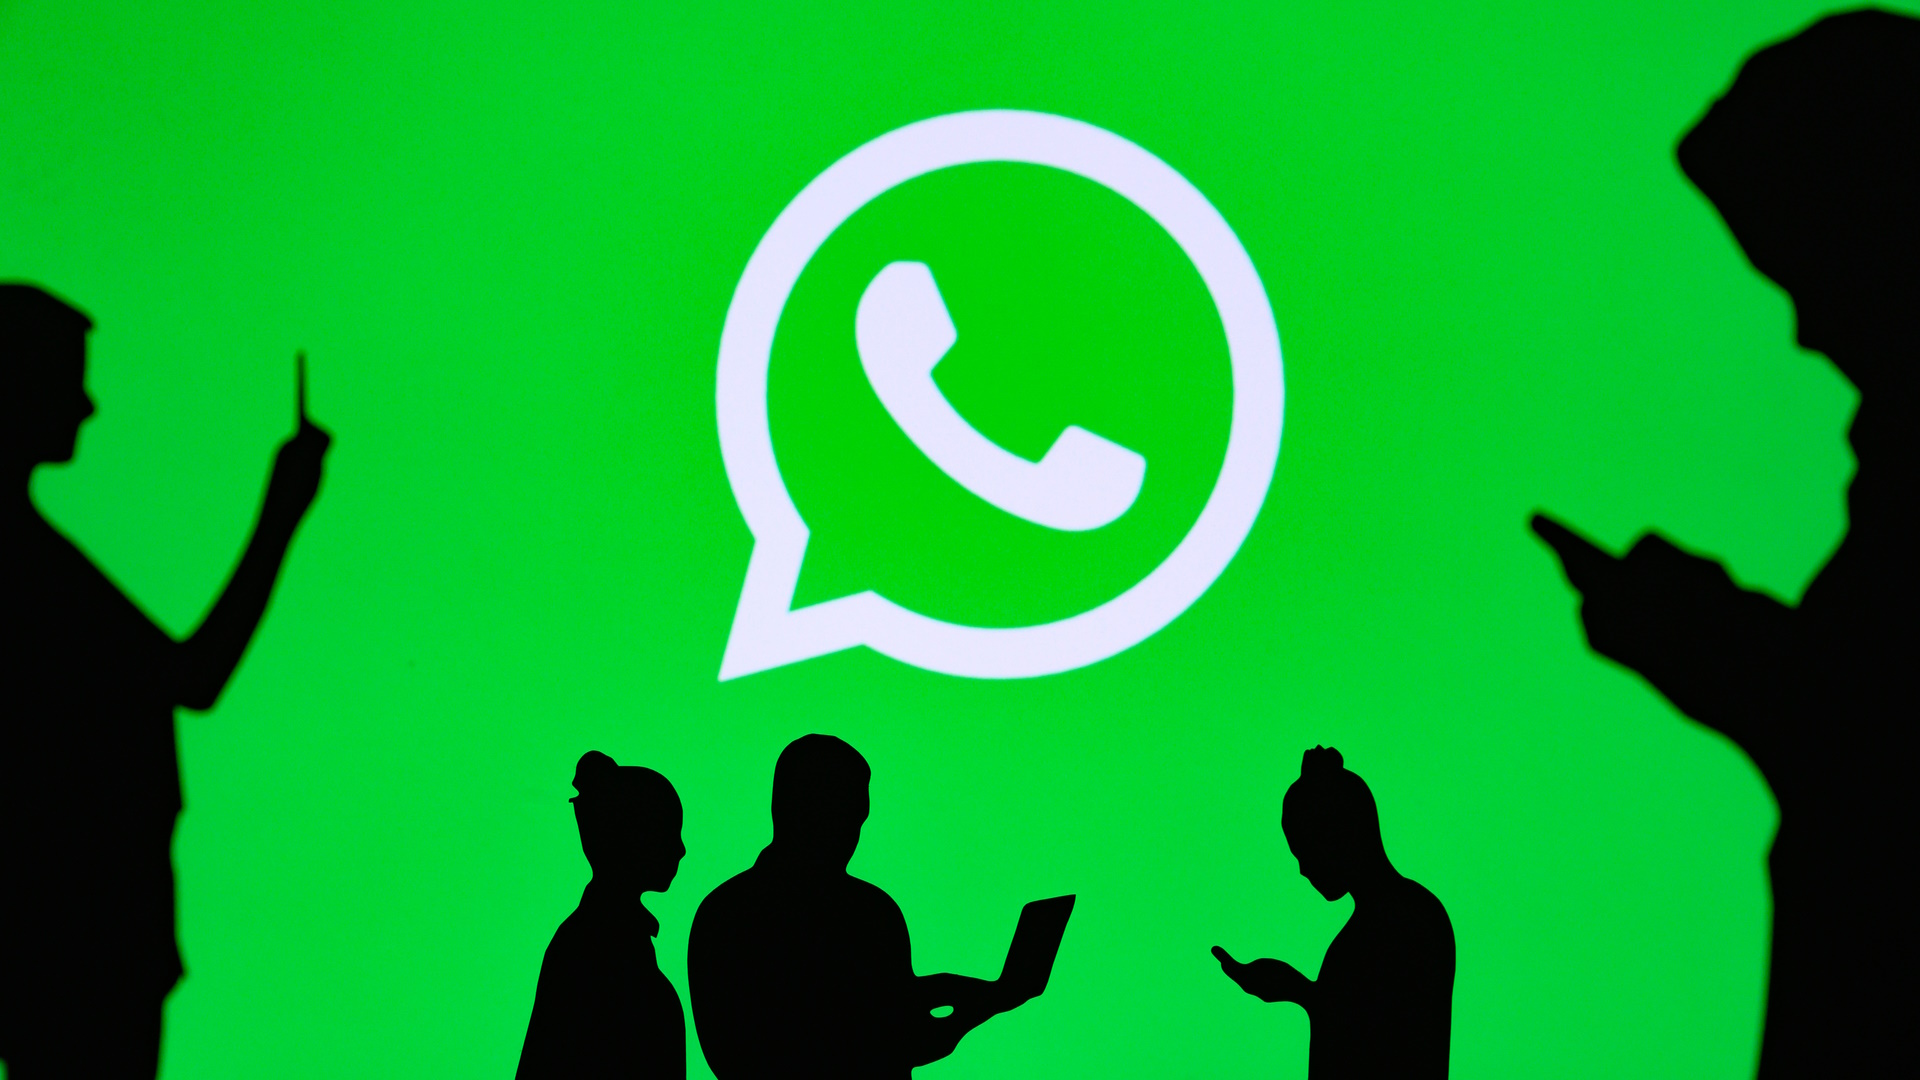 The WhatsApp update brings the ability to search for users by username